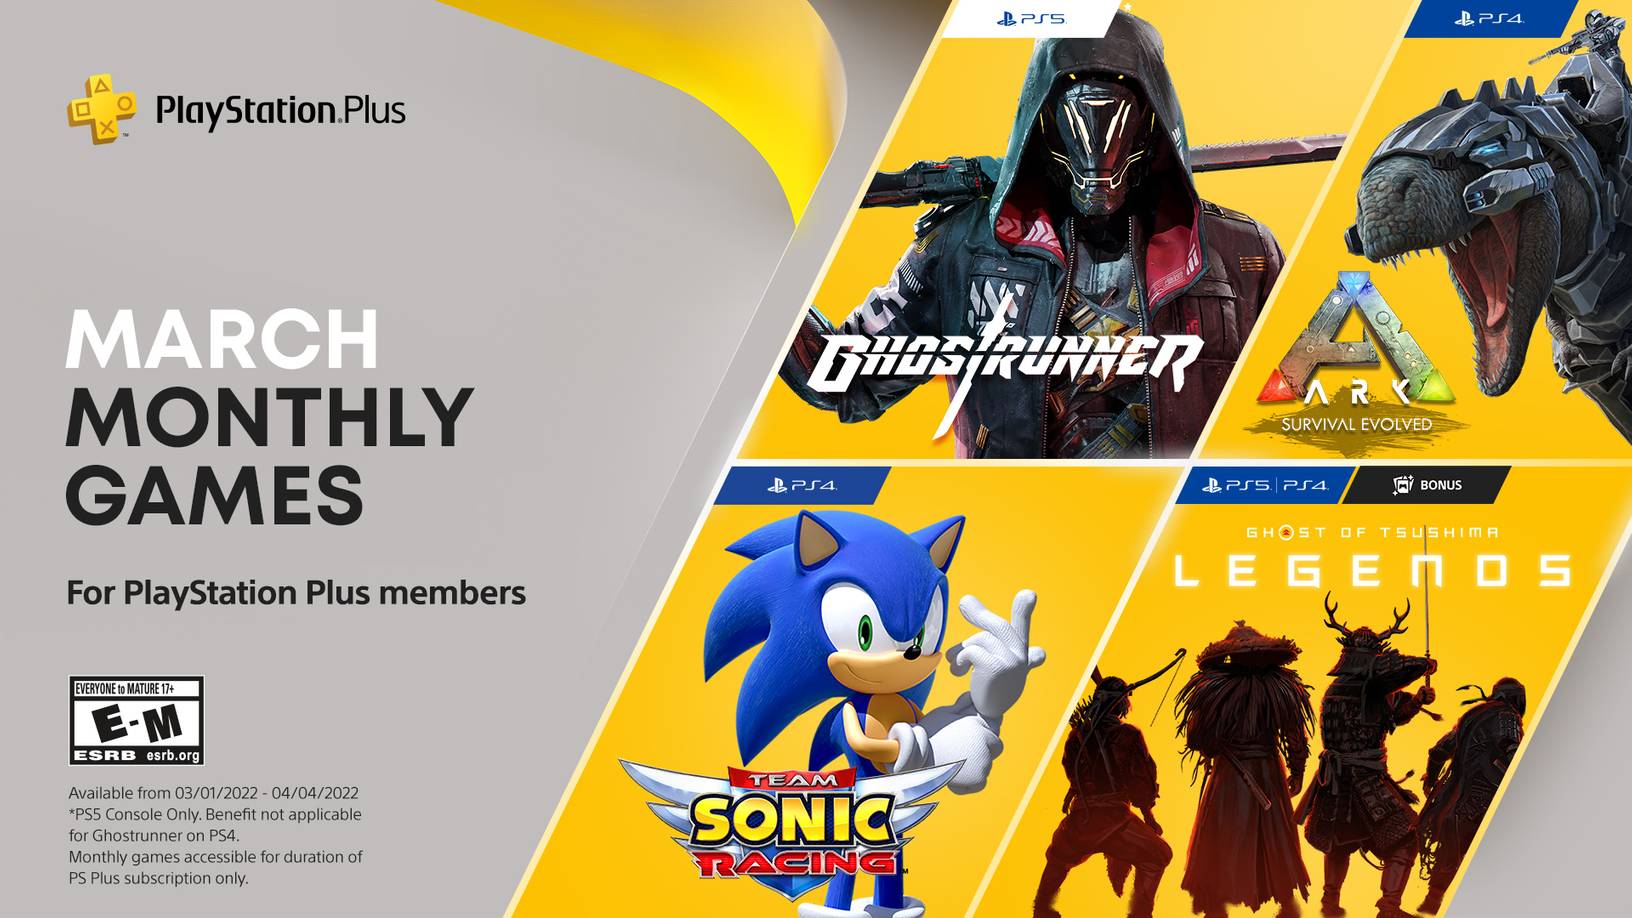 March 2022 PlayStation Plus games announced